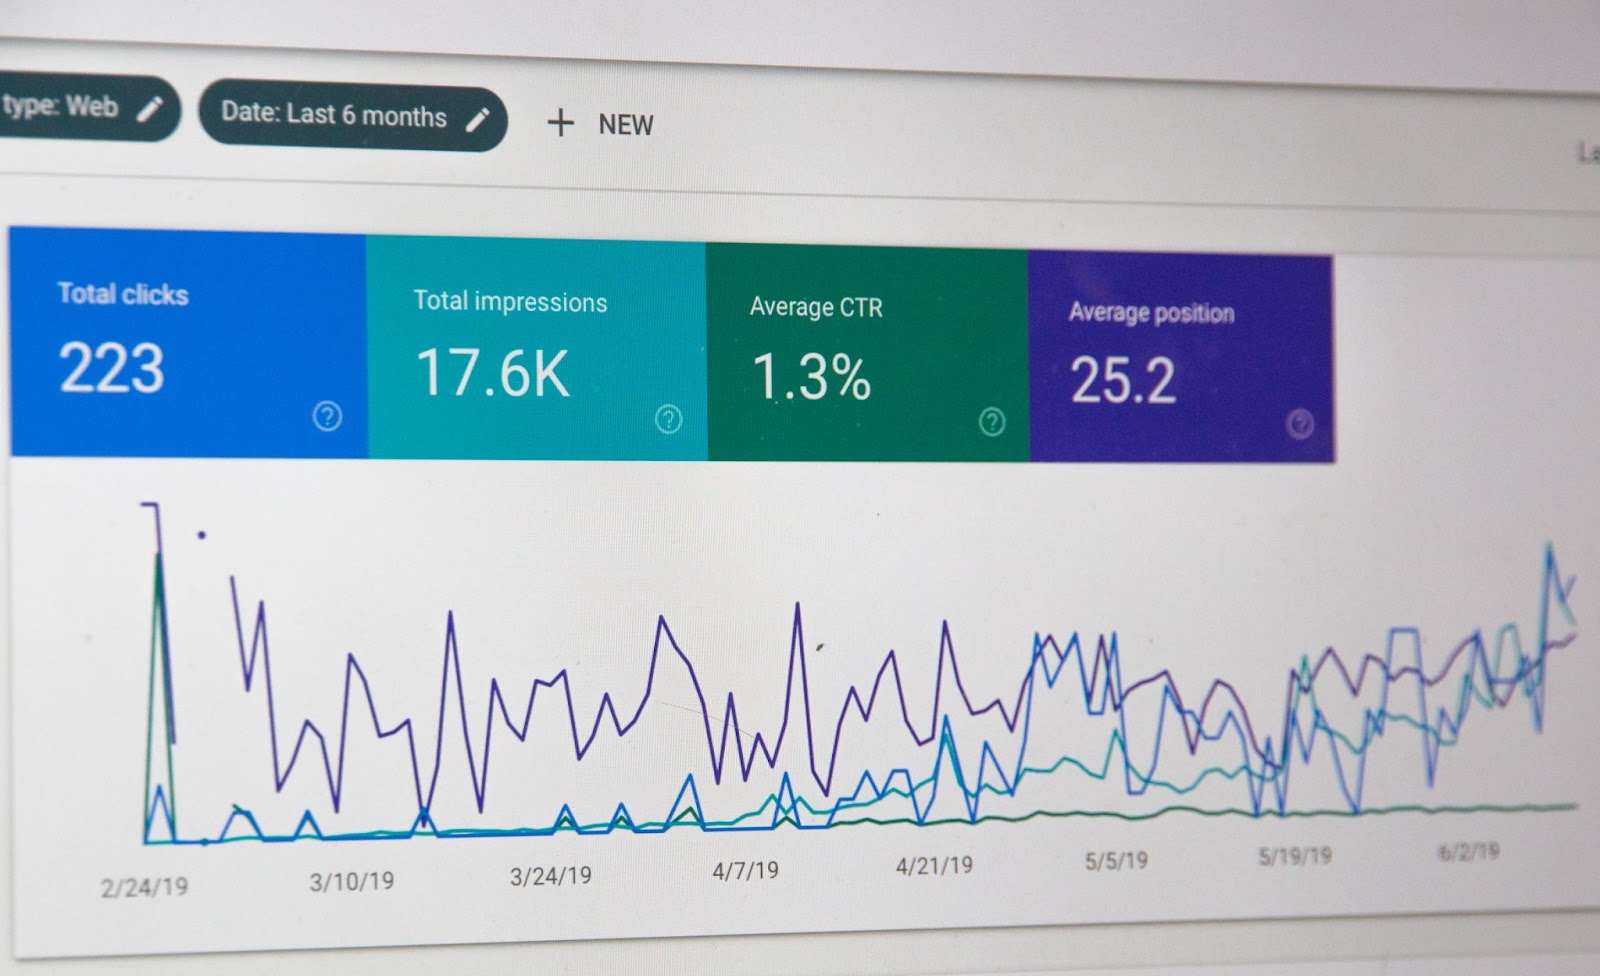 Screen monitoring showing graphs of Clicks, Impressions, and CTR